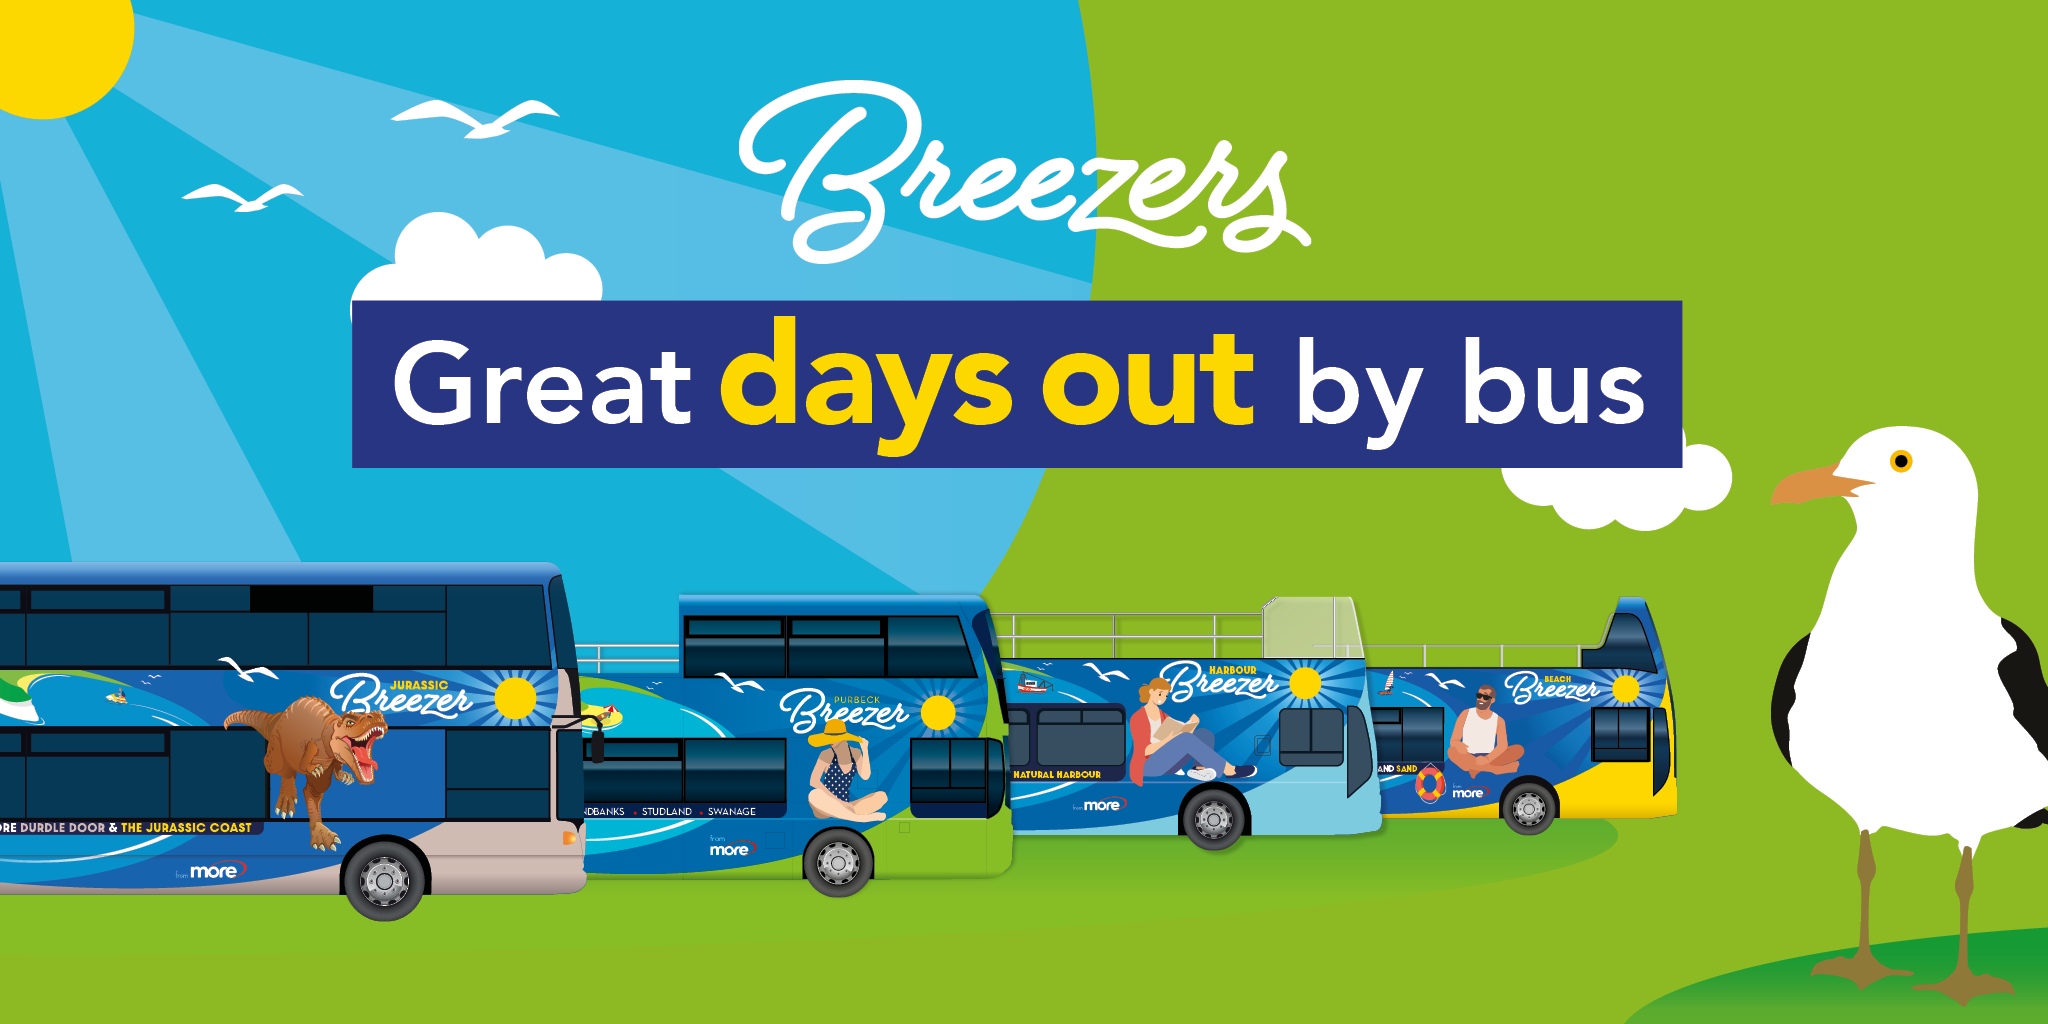 image of breezer buses all routes